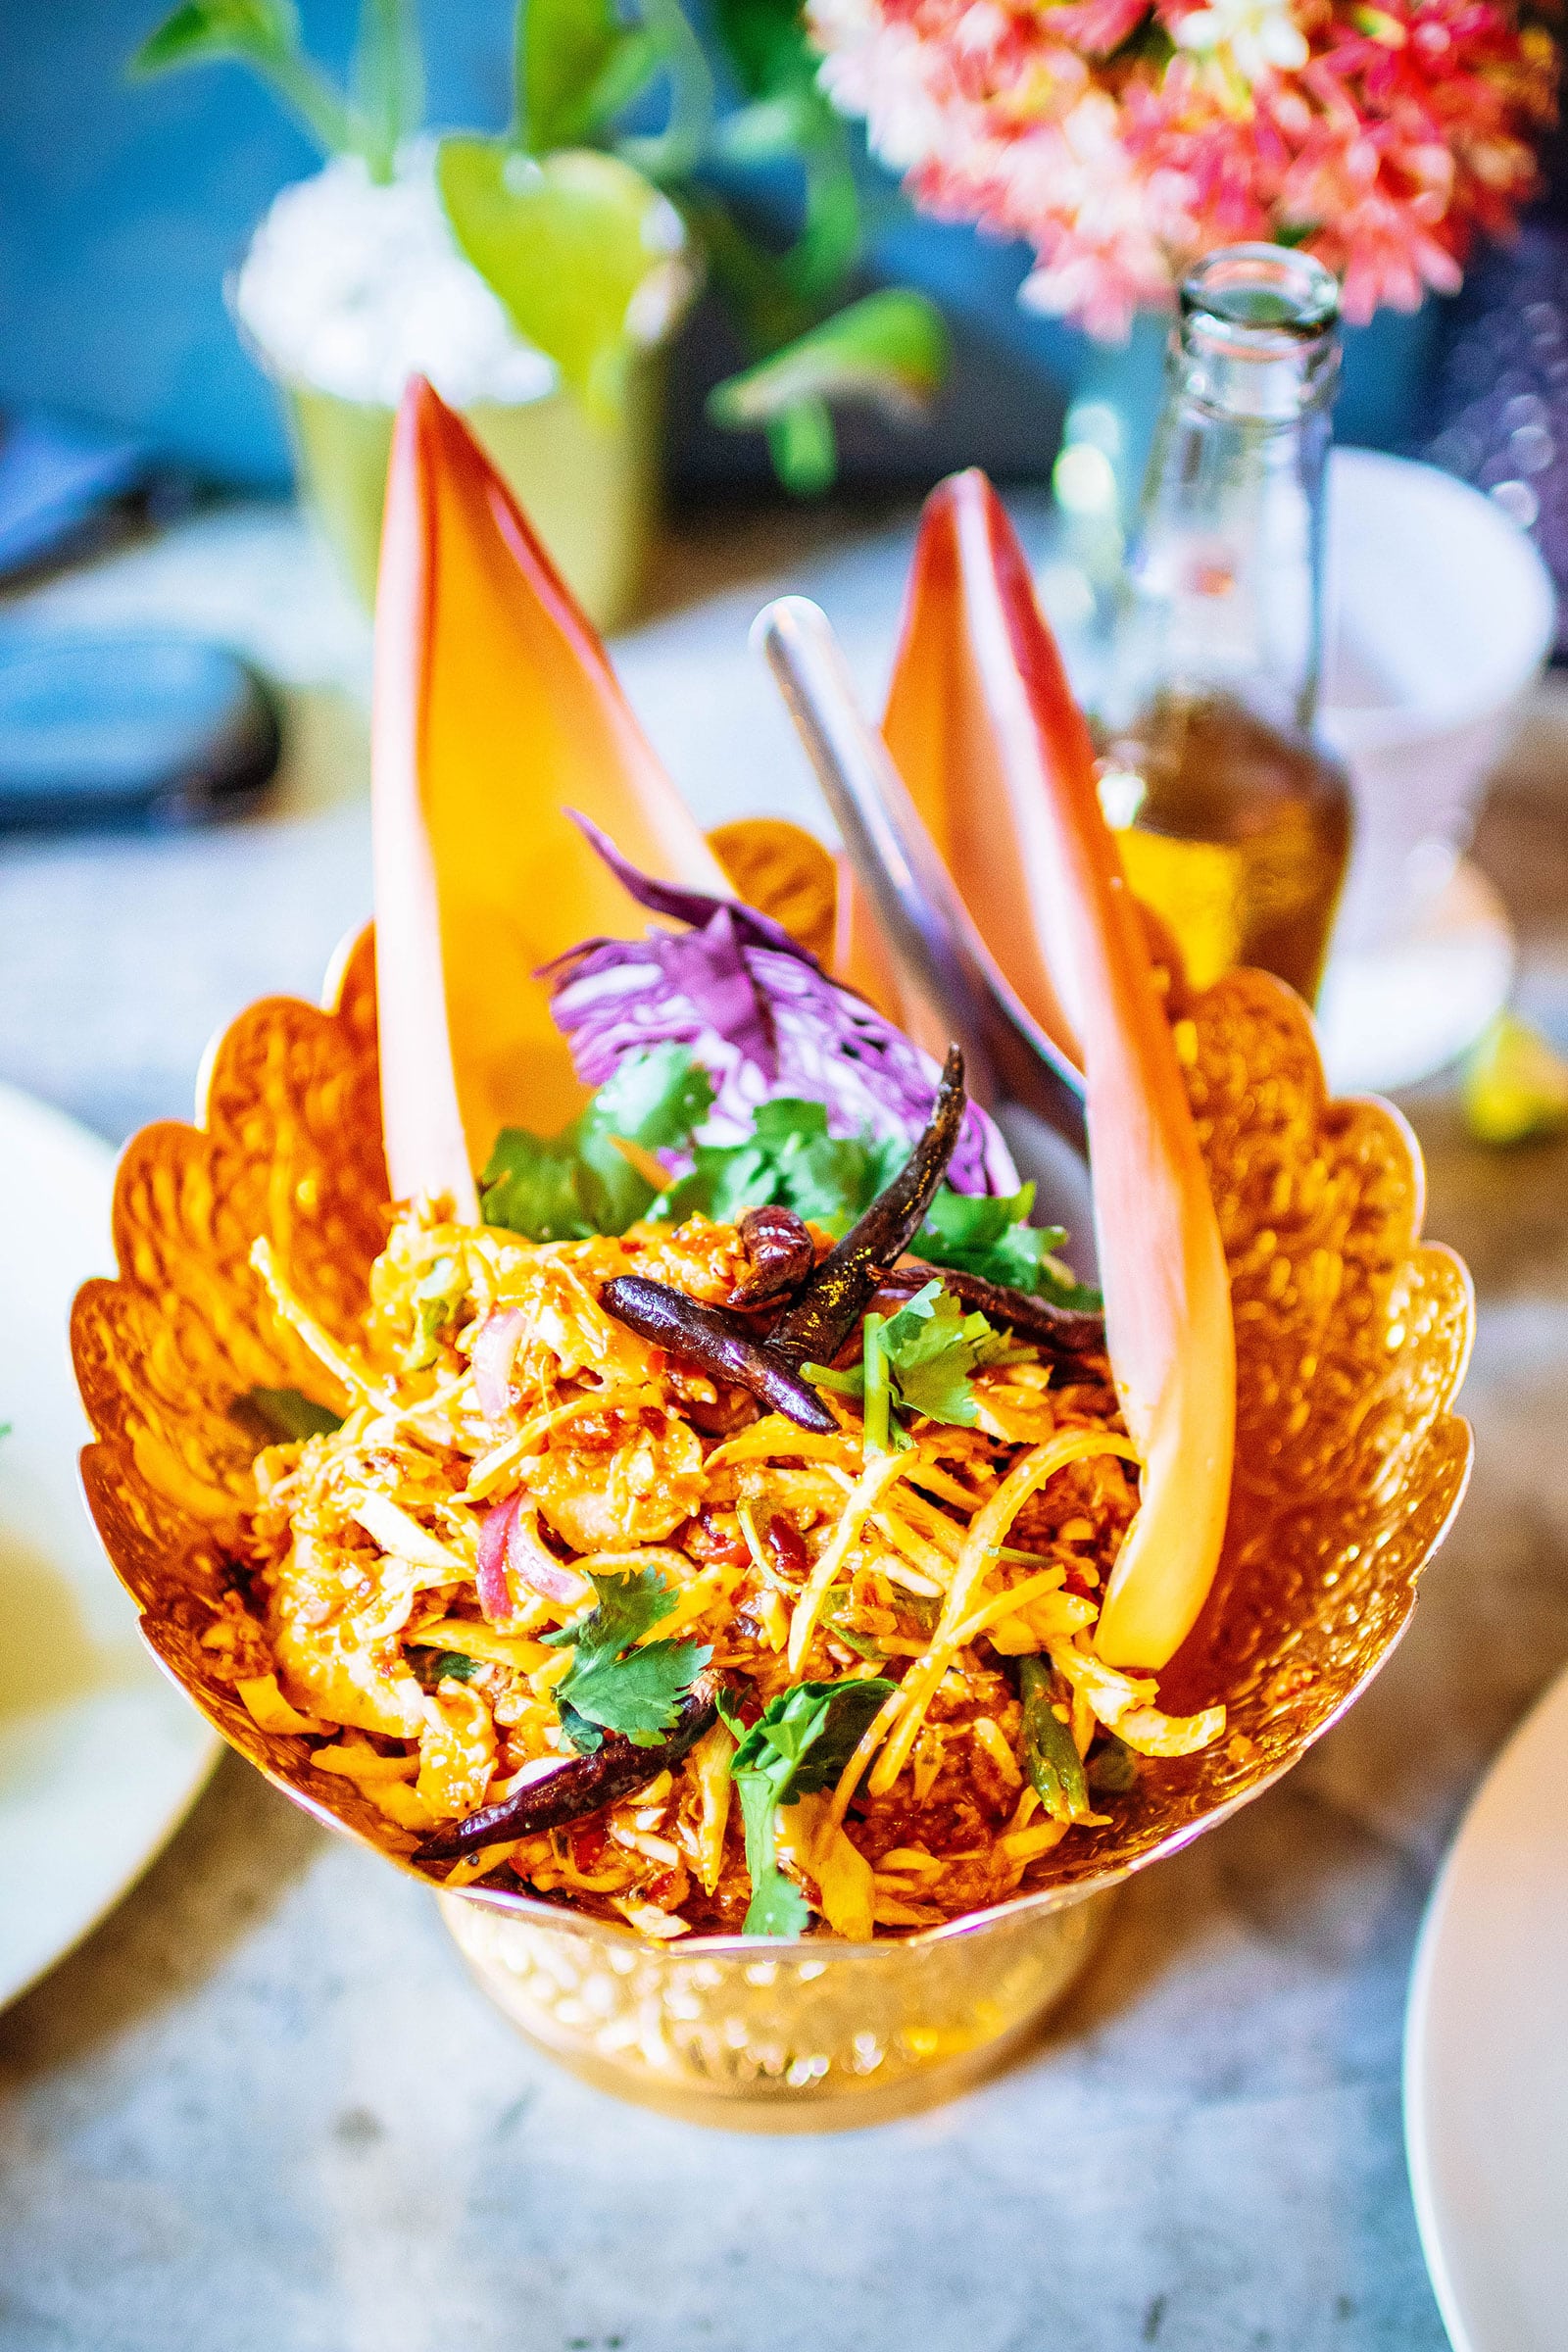 Thai banana blossom salad in a gold bowl with banana bracts used as a garnish